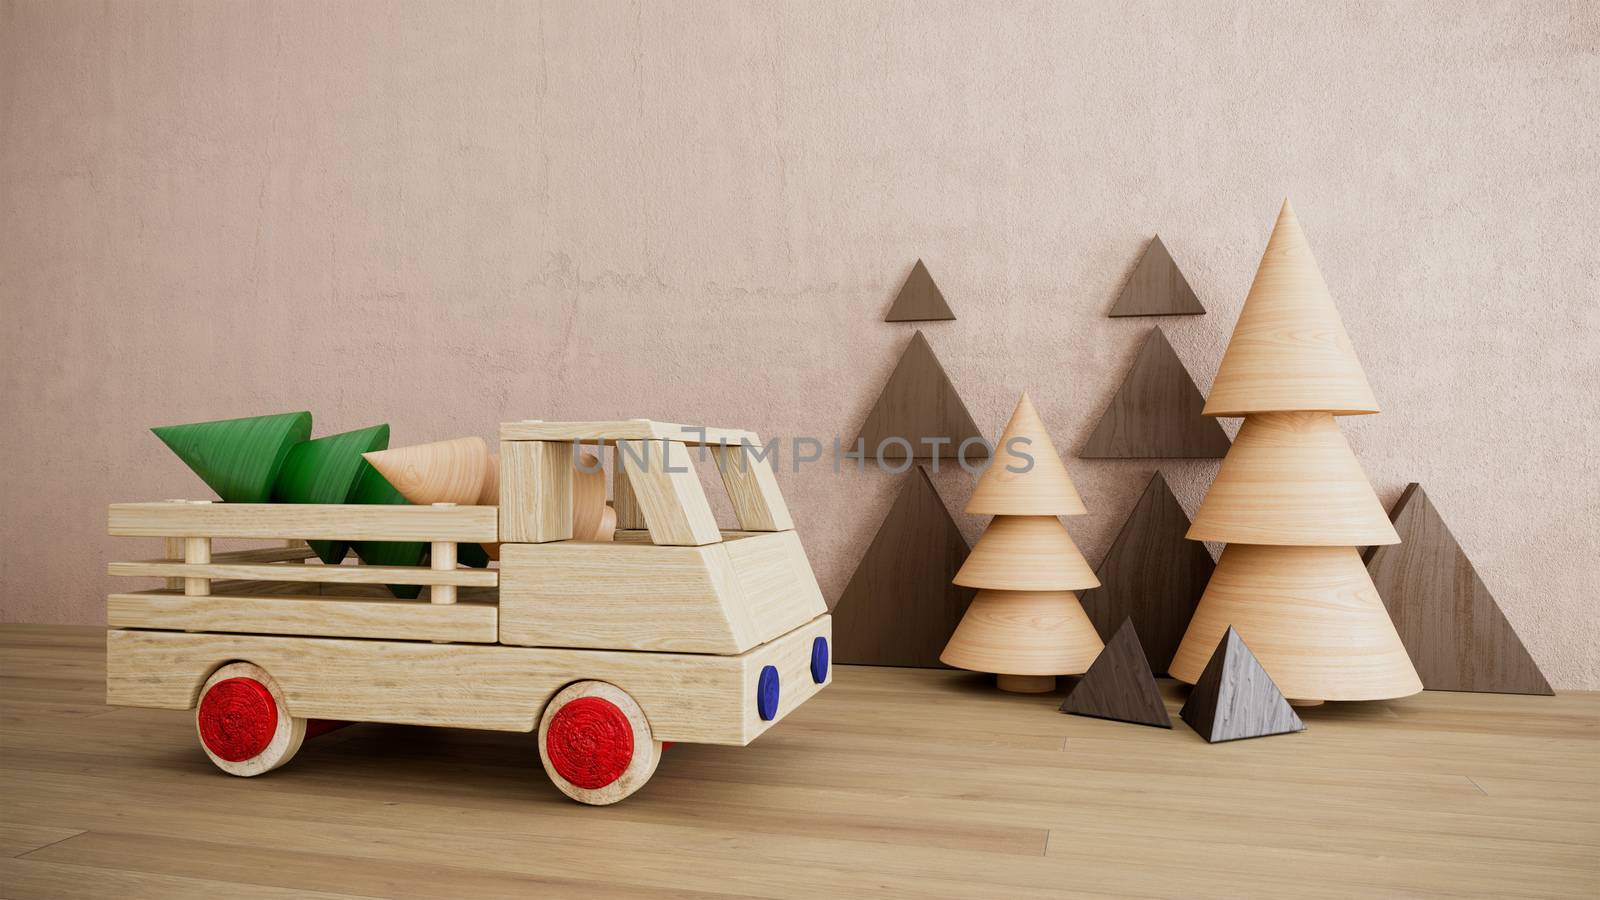 Wooden toy with car christmas holiday photo with pine trees happy new year by denisgo